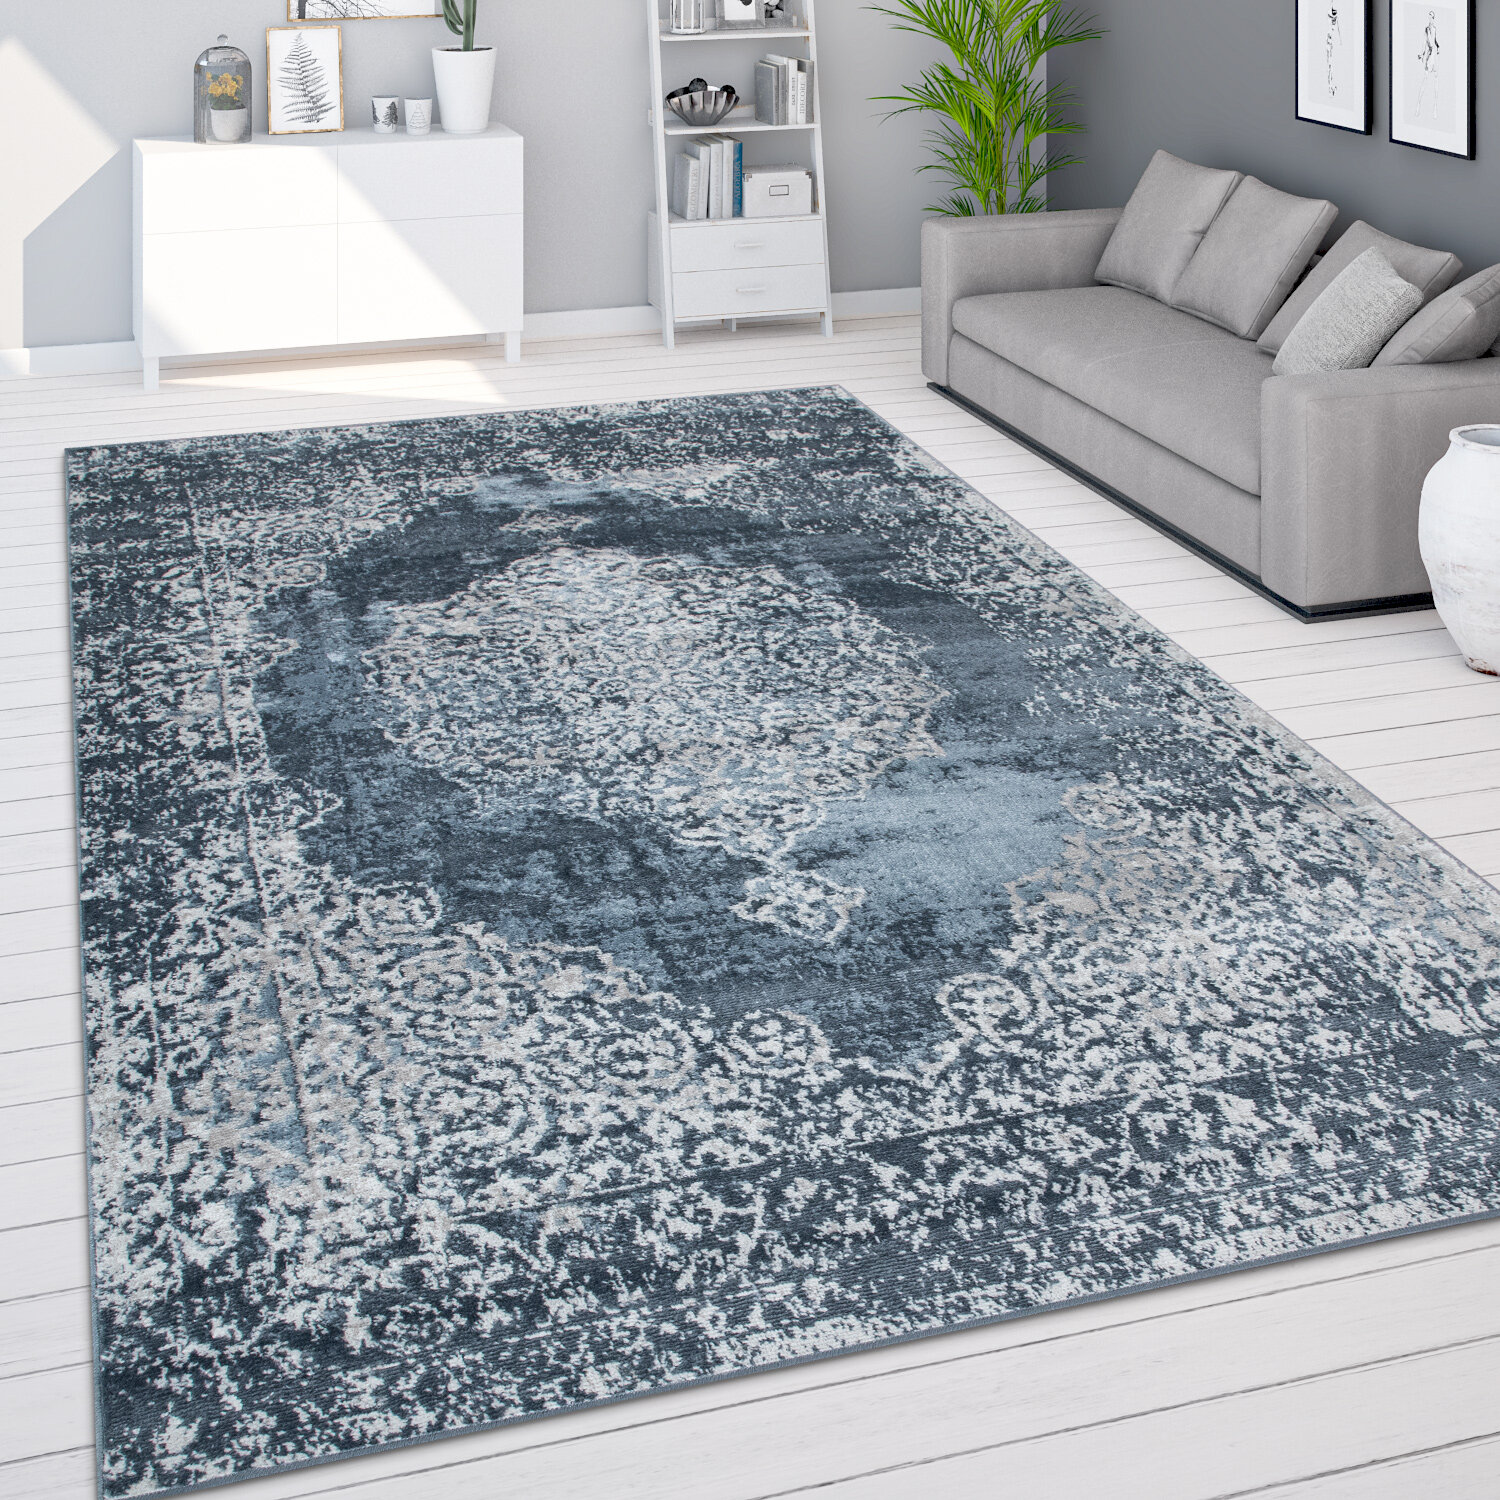 Super Soft Look Living Area Rug Shabby Short Pile Durable Carpet in Grey Blue 